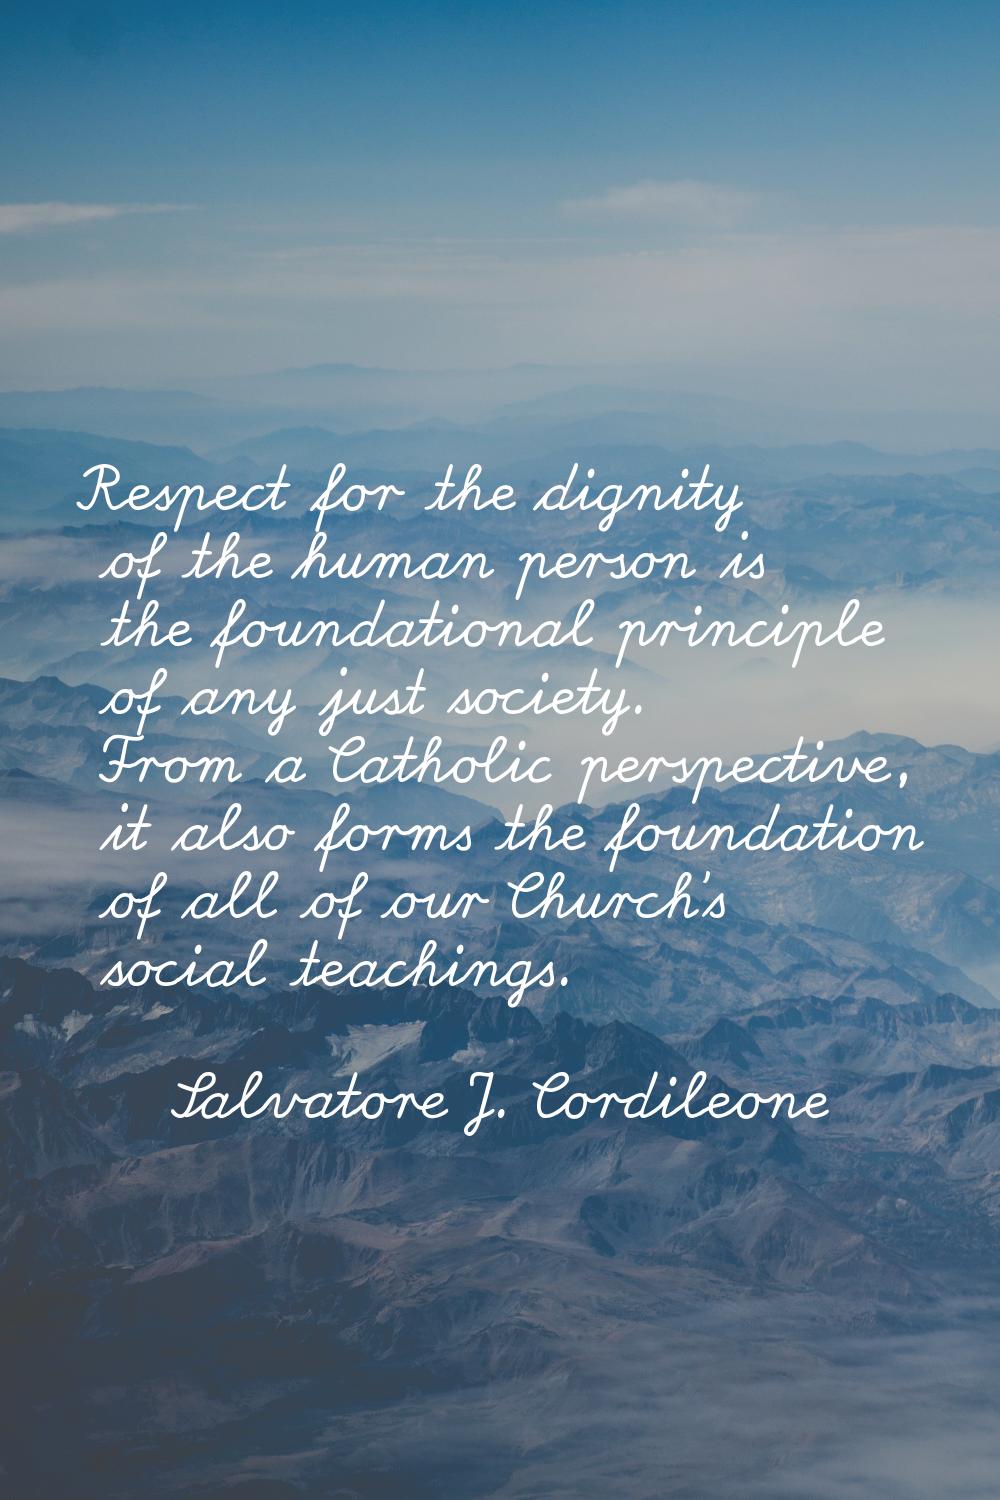 Respect for the dignity of the human person is the foundational principle of any just society. From